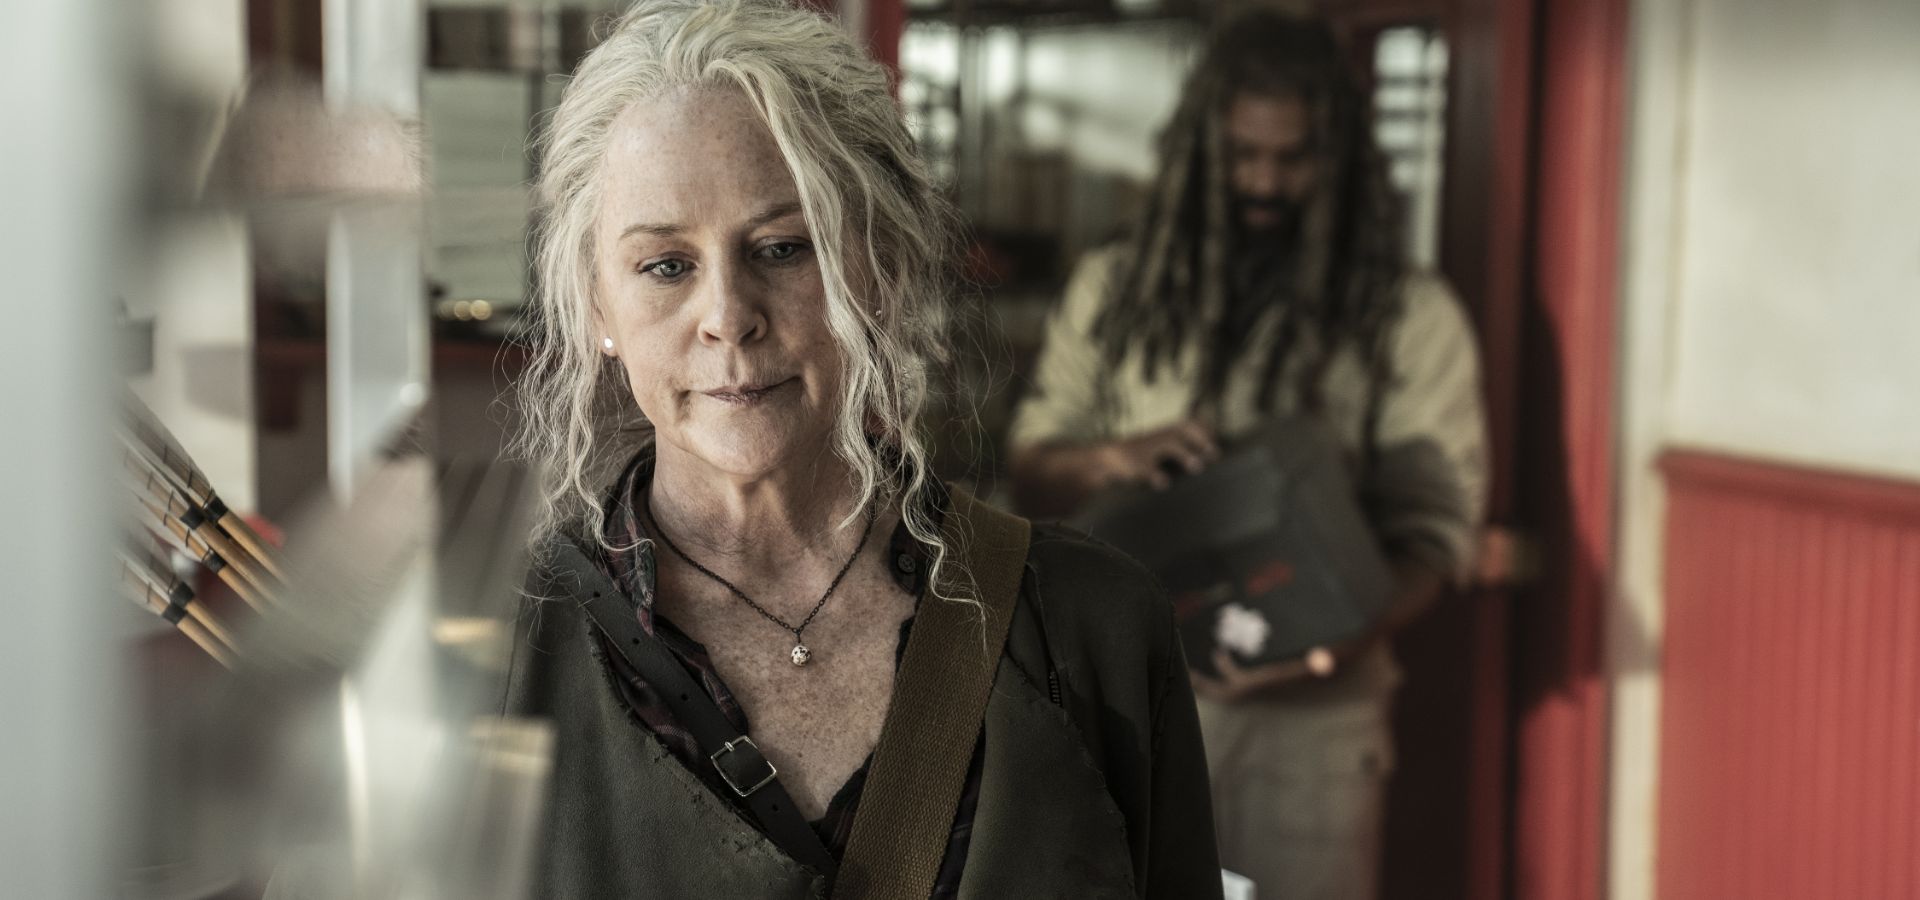 The Walking Dead Q&A — Melissa McBride On Carol & Daryl Reuniting To Fight The Commonwealth